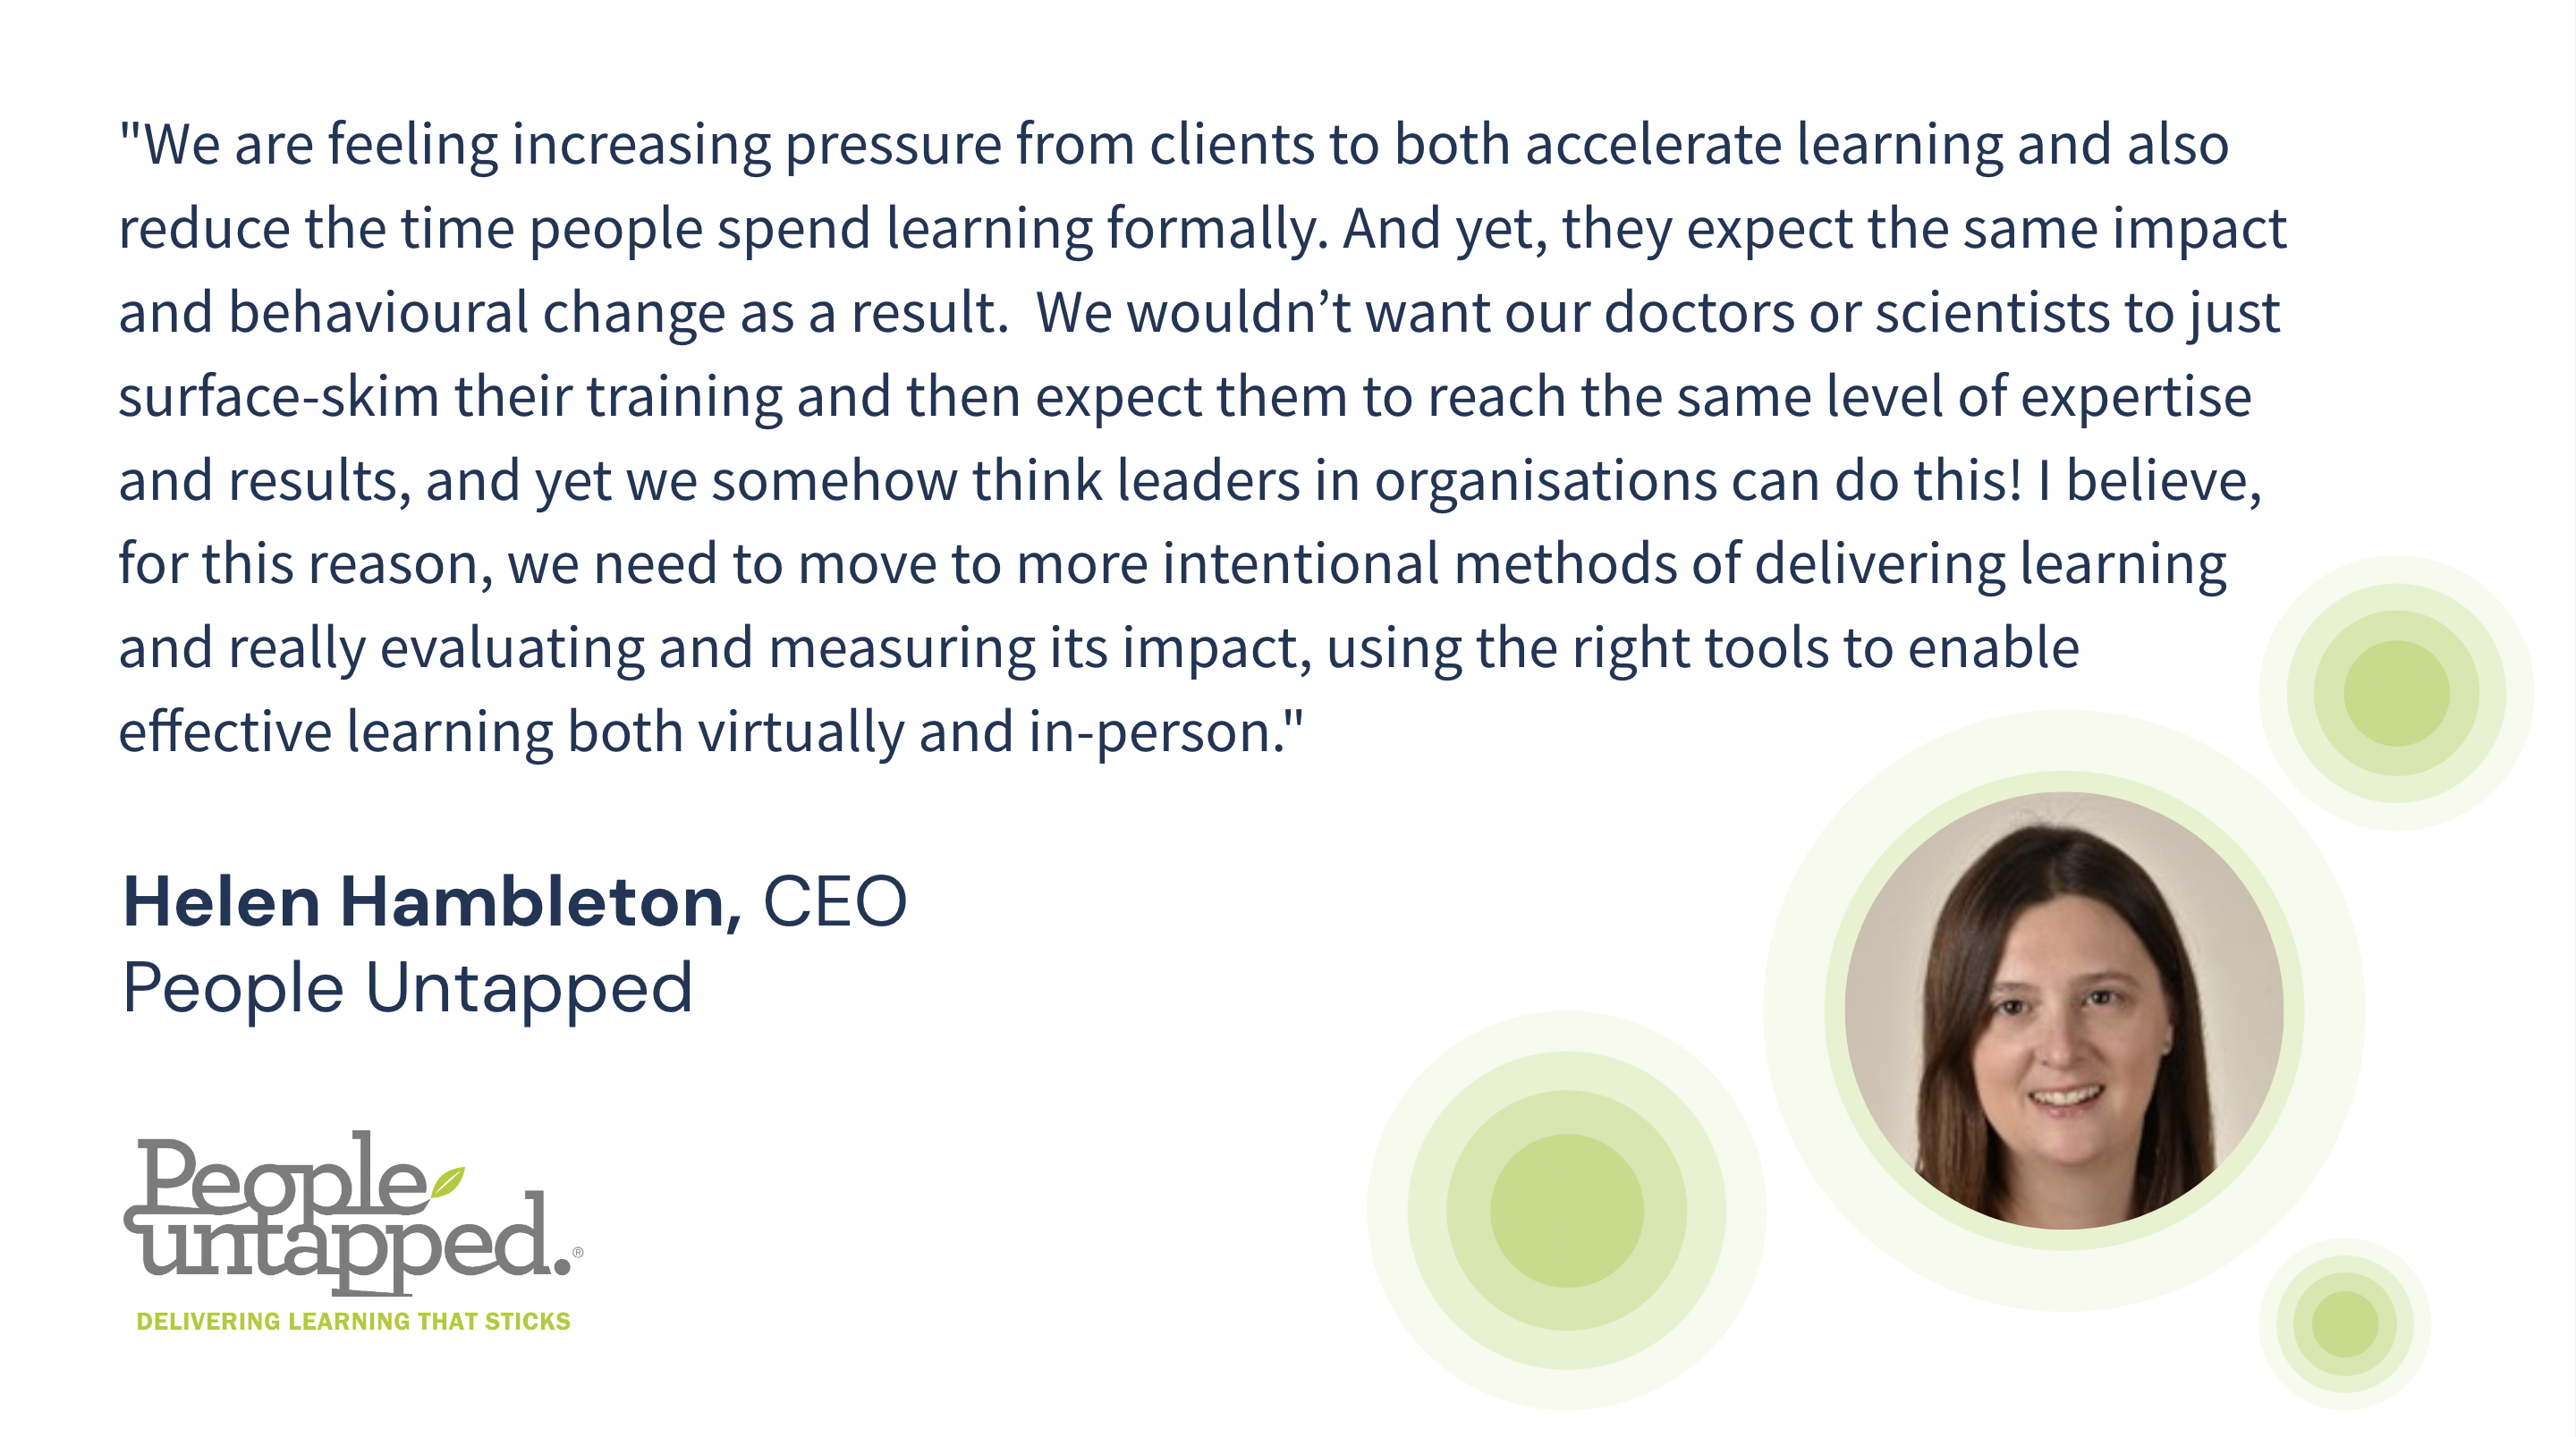 Helen Hambleton, CEO of People Untapped says: "We are feeling increasing pressure from clients to both accelerate learning and also reduce the time people spend learning formally. And yet, they expect the same impact and behavioural change as a result.  We wouldn’t want our doctors or scientists to just surface-skim their training and then expect them to reach the same level of expertise and results, and yet we somehow think leaders in organisations can do this! I believe, for this reason, we need to move to more intentional methods of delivering learning and really evaluating and measuring its impact, using the right tools to enable effective learning both virtually and in-person."